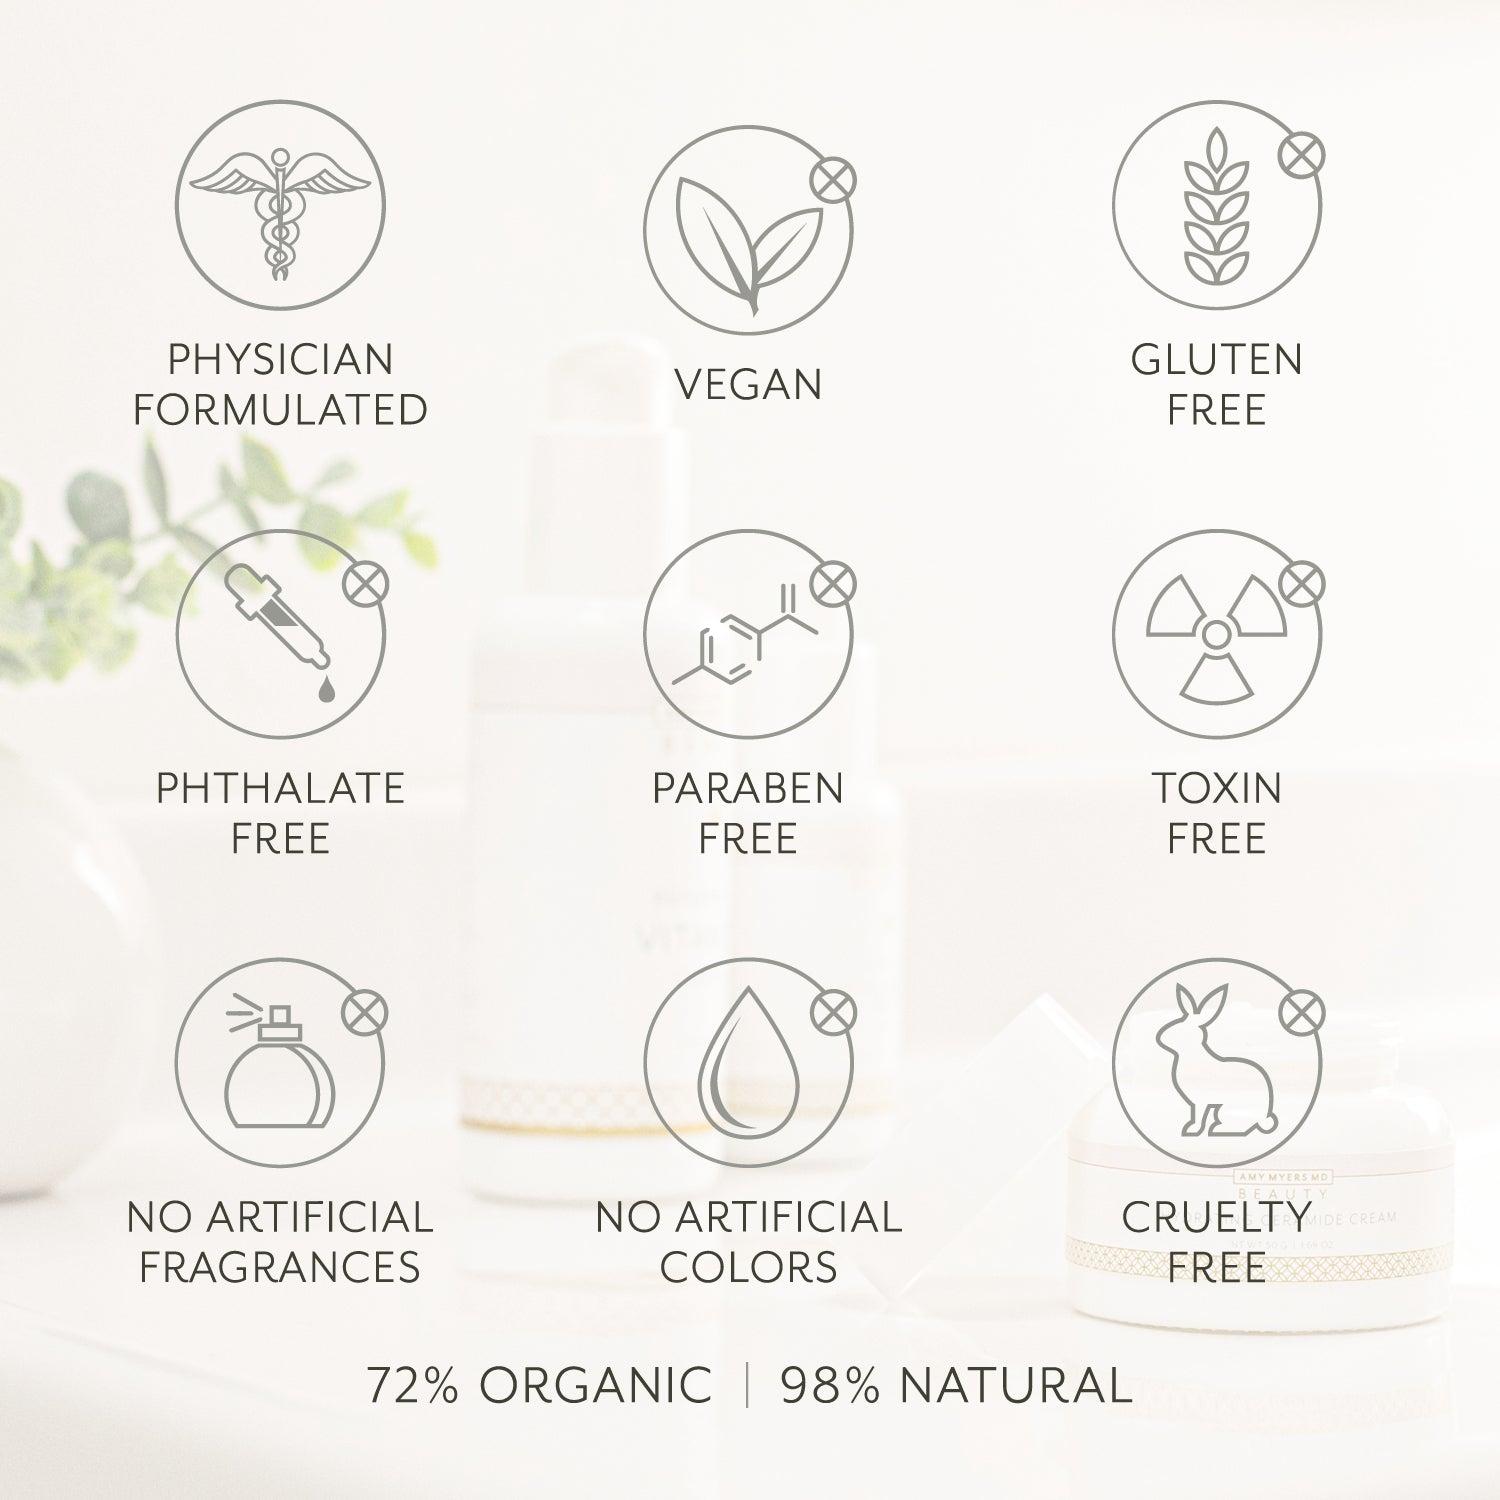 Hydrating Ceramide Cream Product Facts - Infographic - Amy Myers MD®